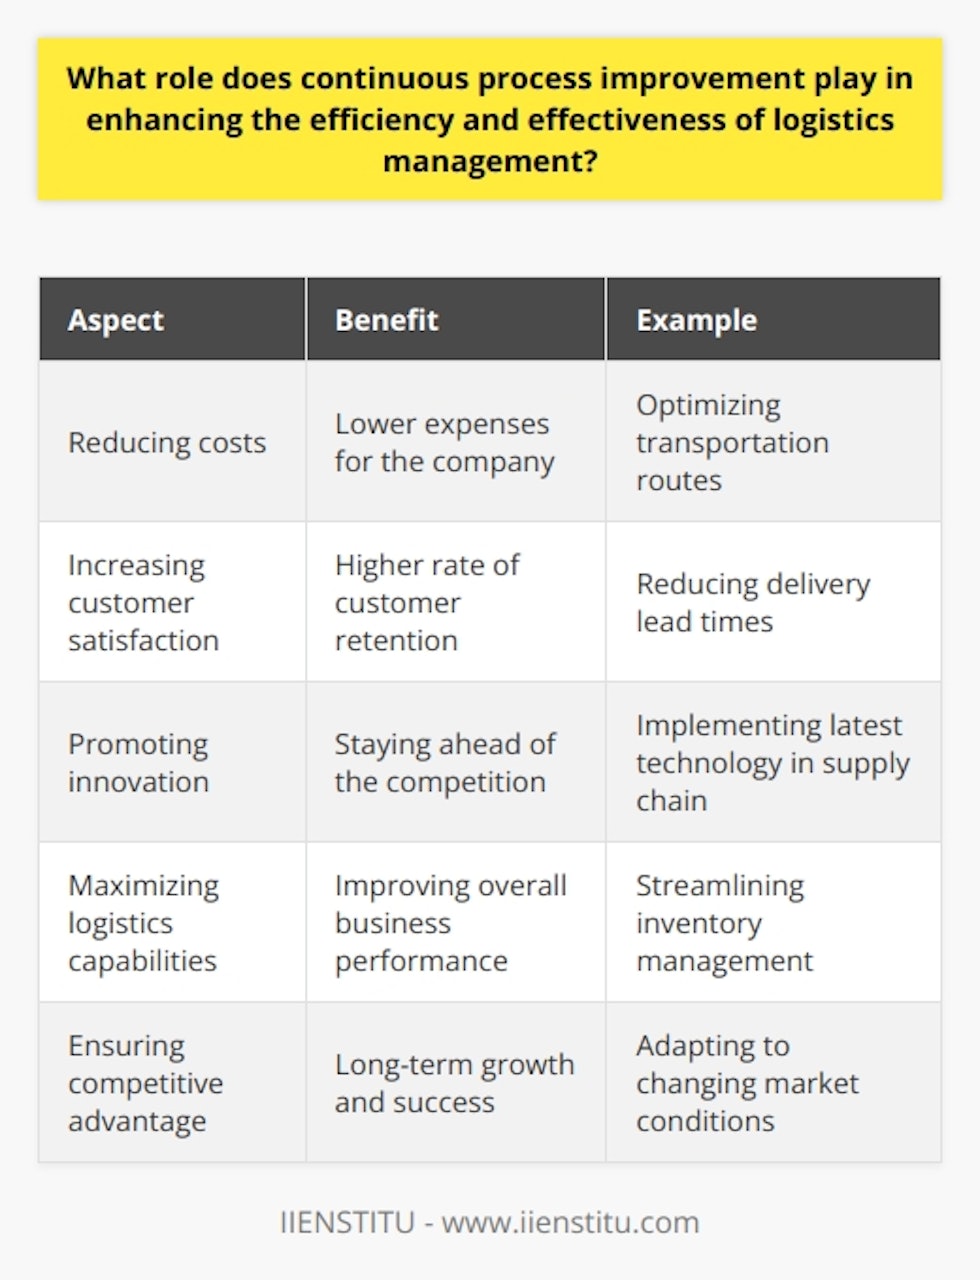 By reducing costs, increasing customer satisfaction, and promoting innovation, continuous process improvement plays a vital role in the overall success of a business. By adopting this approach, organizations such as IIENSTITU can maximize their logistics capabilities, ensuring a competitive advantage and long-term growth.